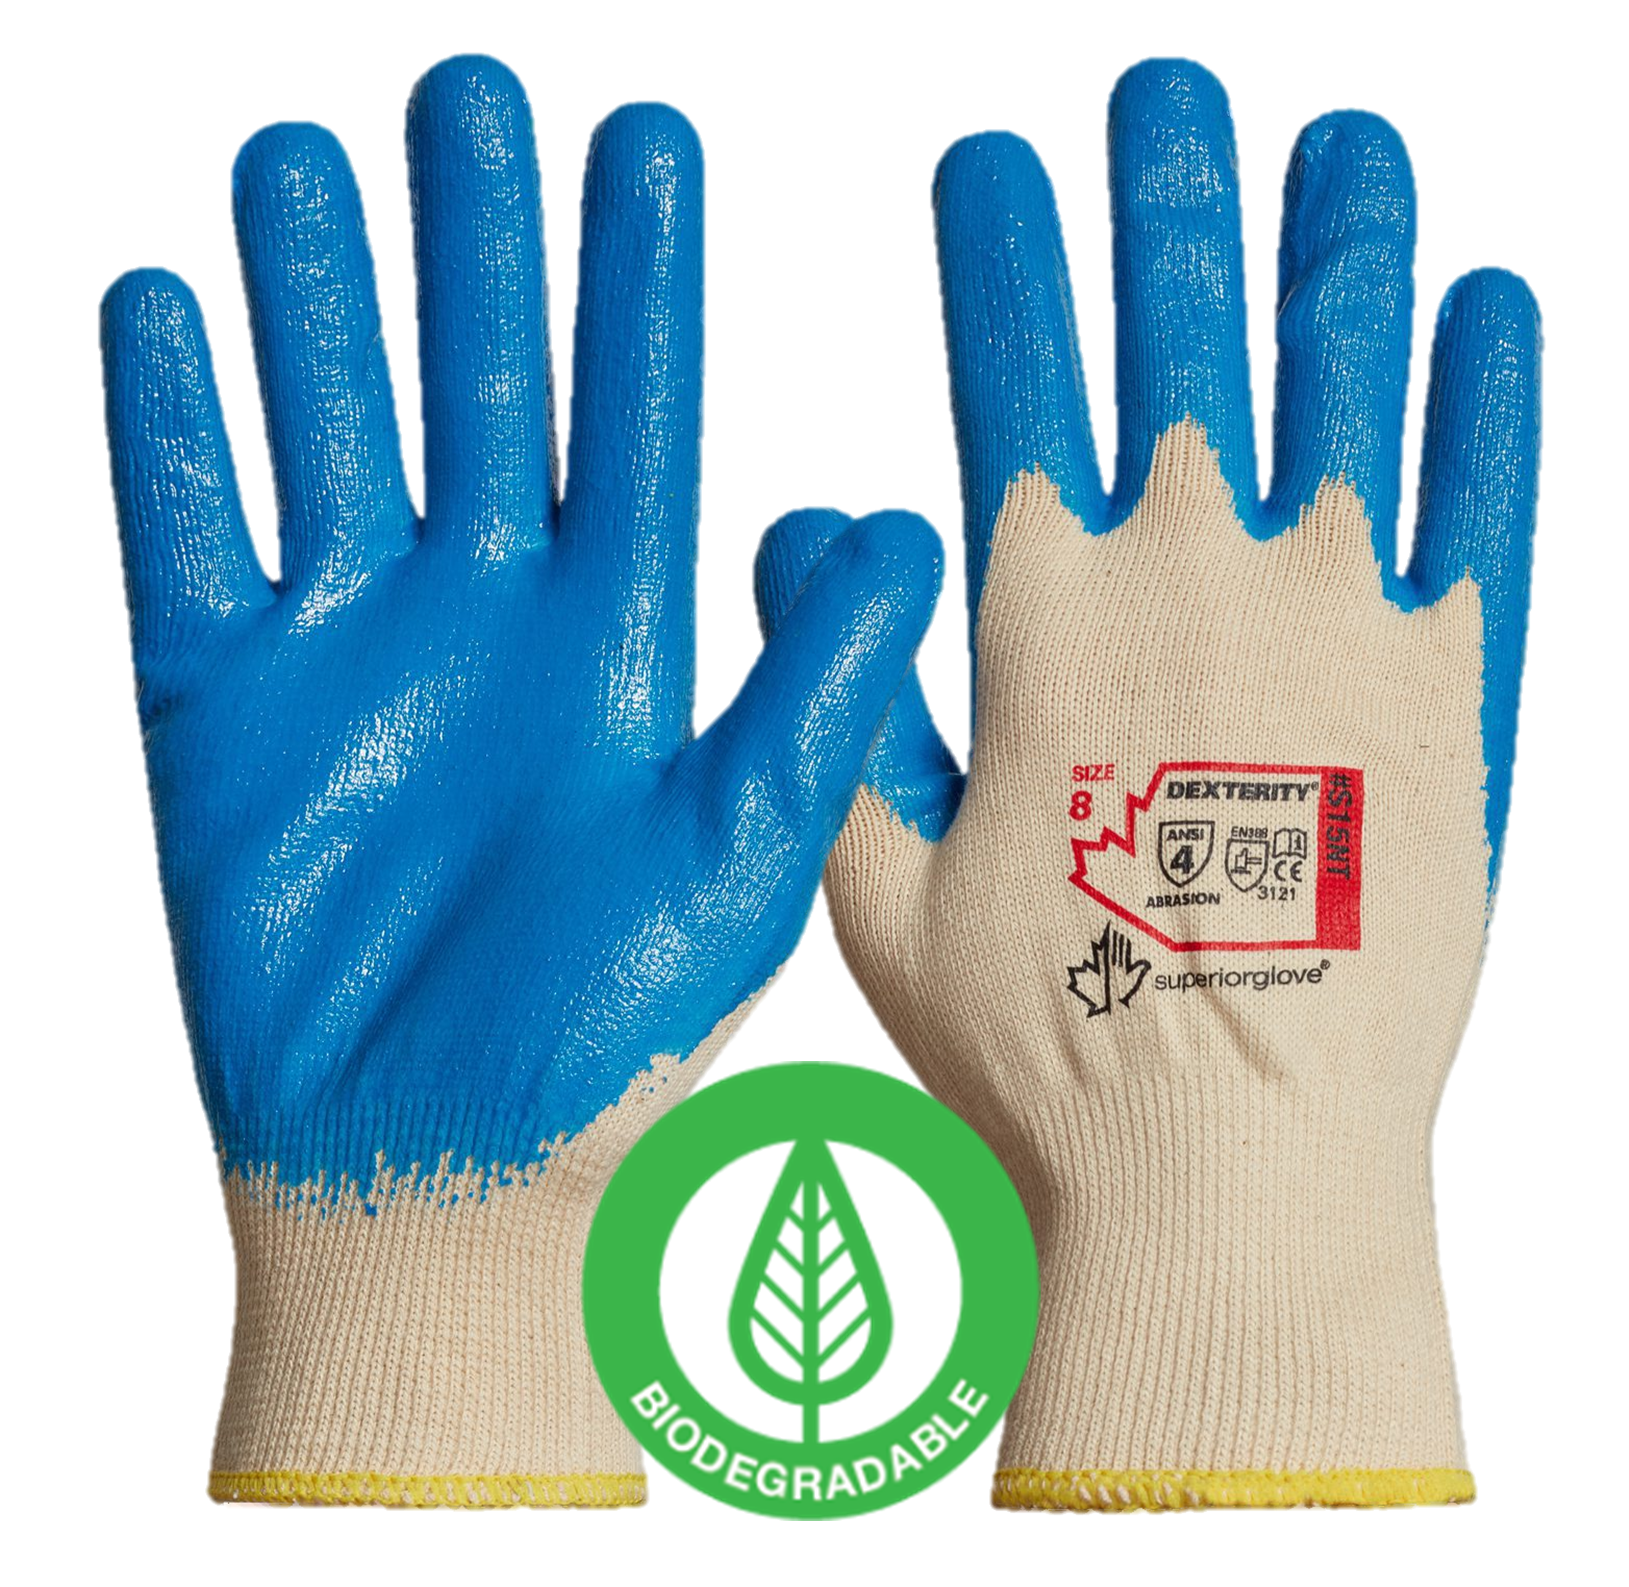 Superior® Glove Dexterity® S15NT Biodegradable Nitrile Coated Work Gloves